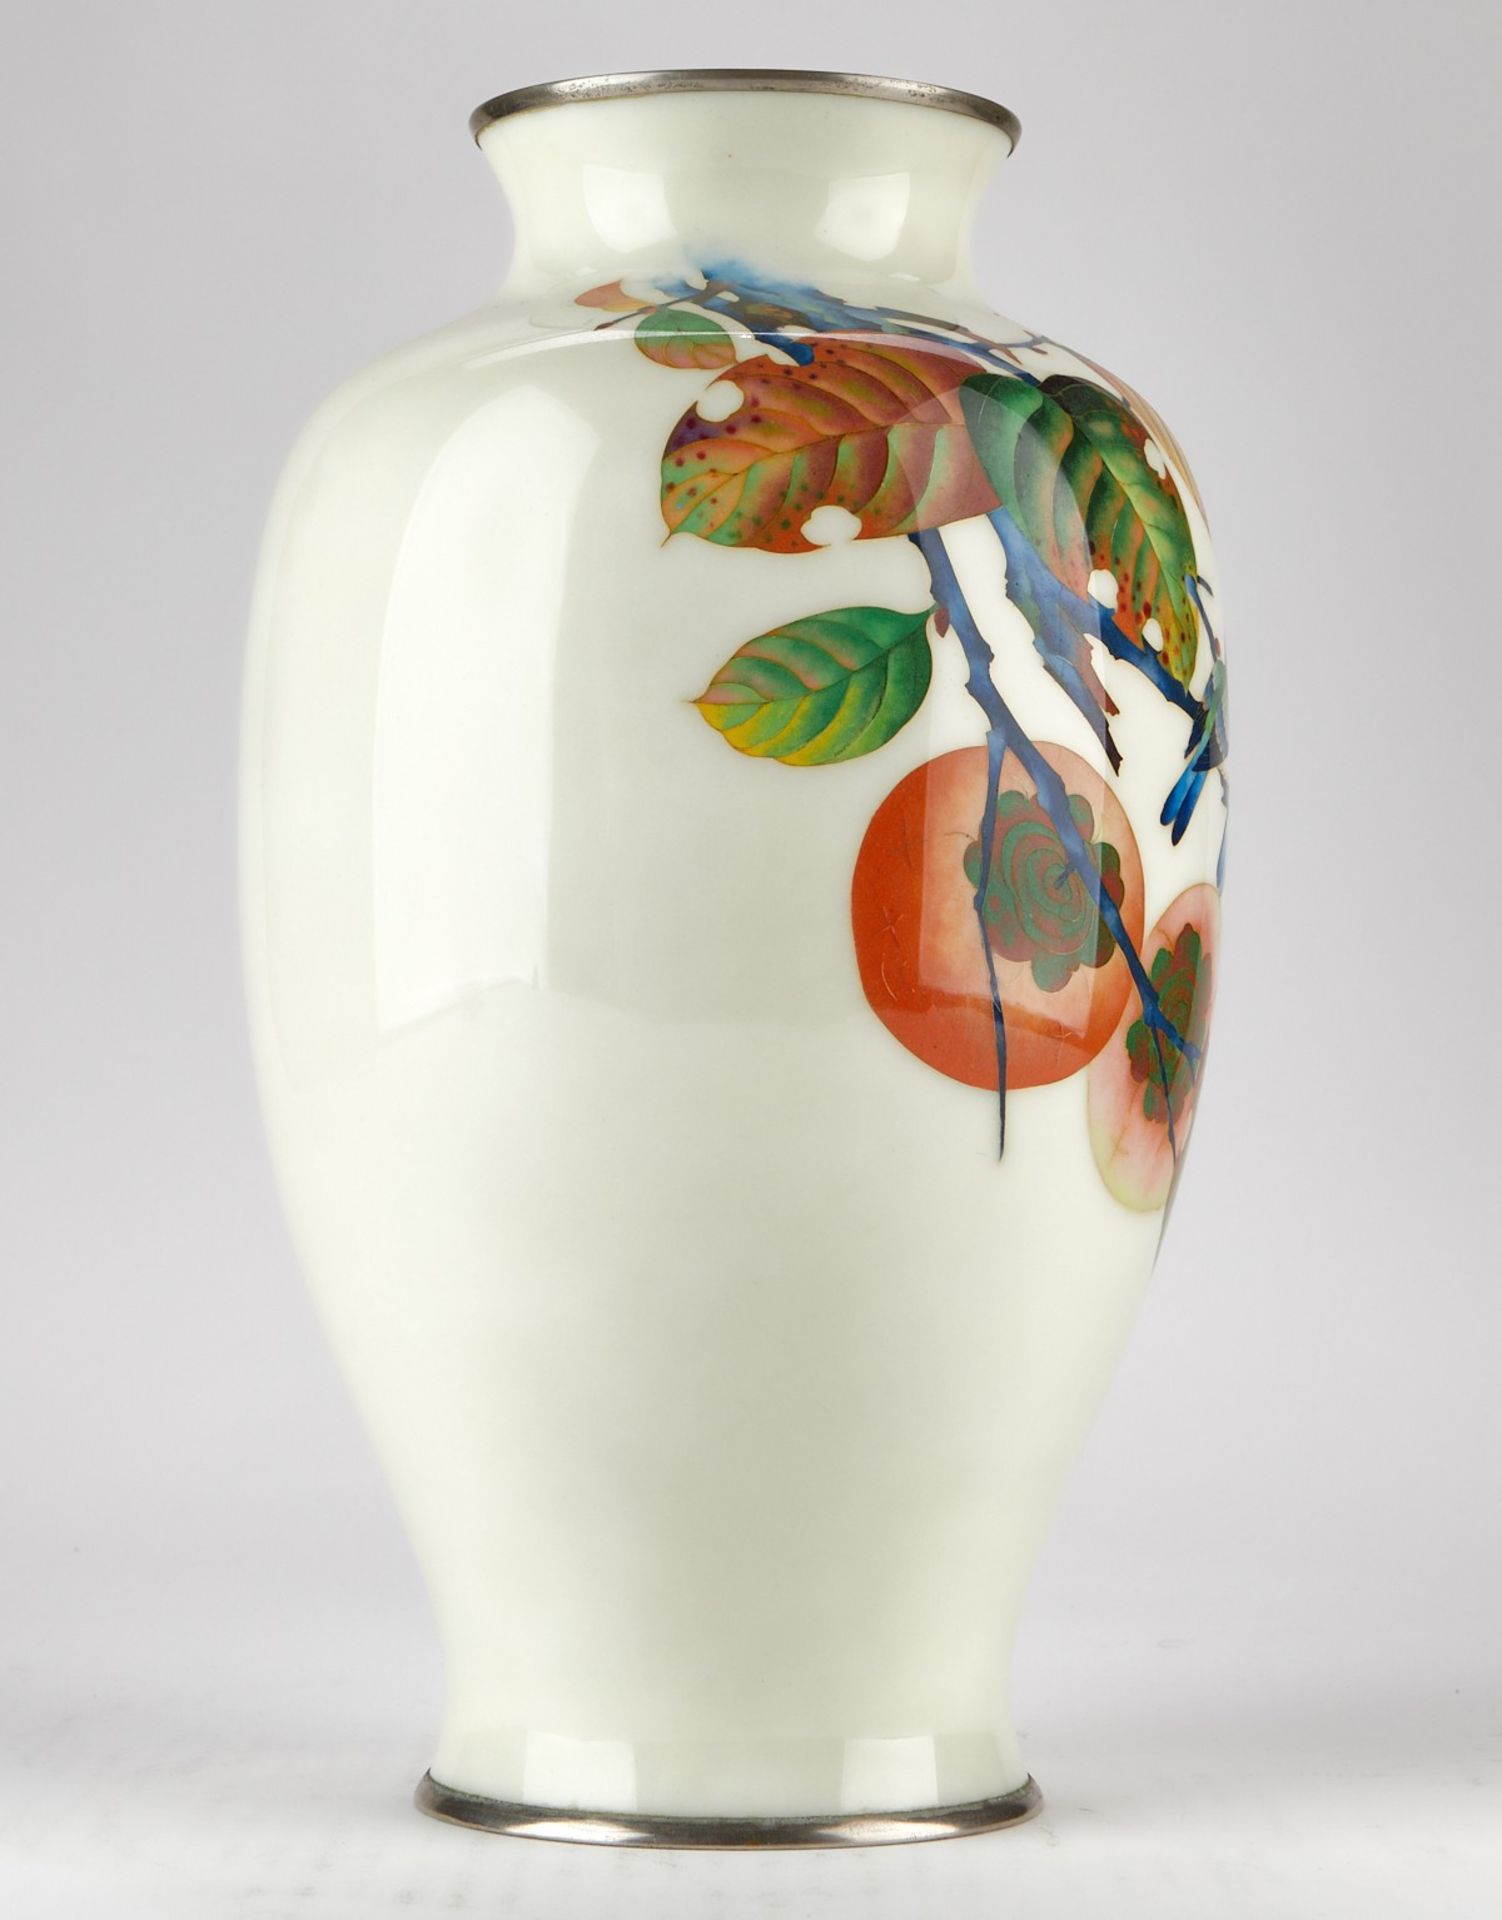 Japanese Cloisonne Vase w/ Persimmons and Birds - Image 3 of 7